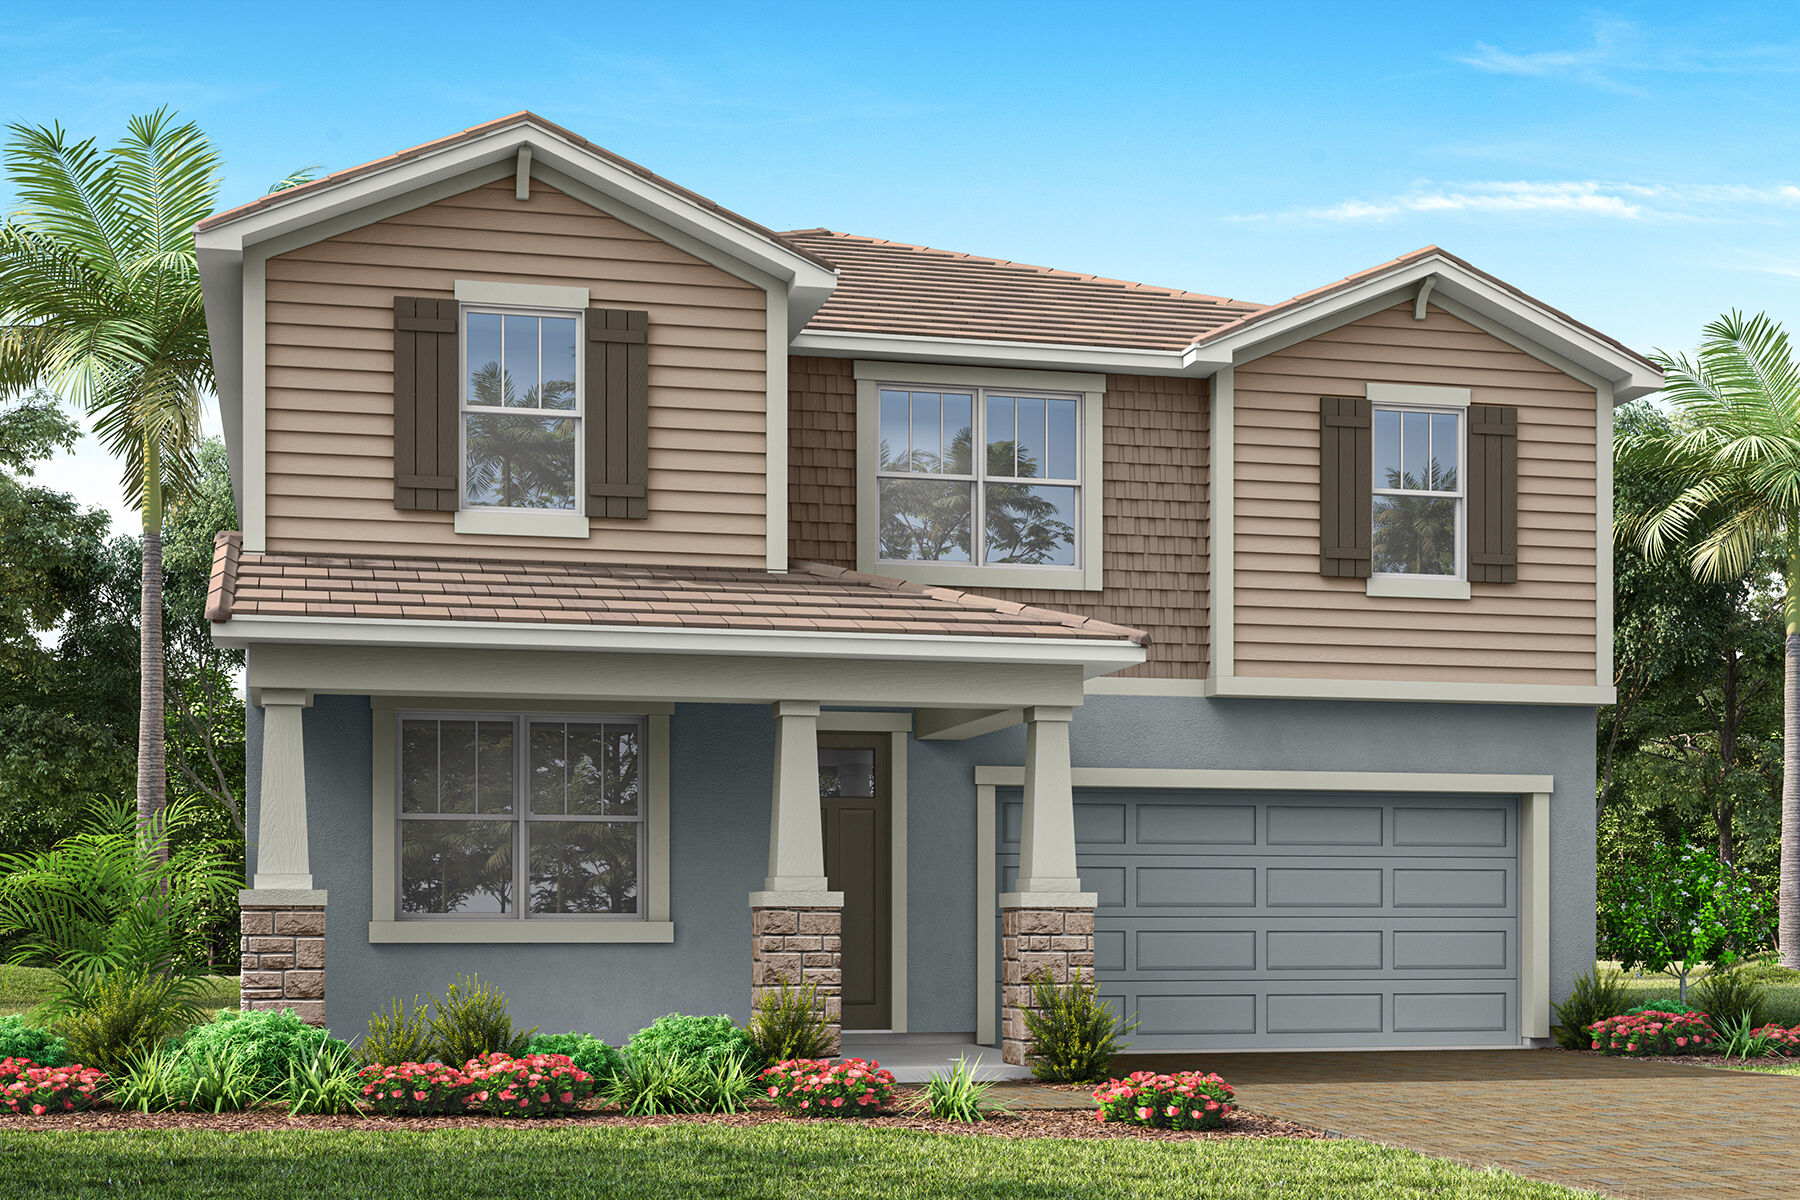 exterior rendering of 2-story home